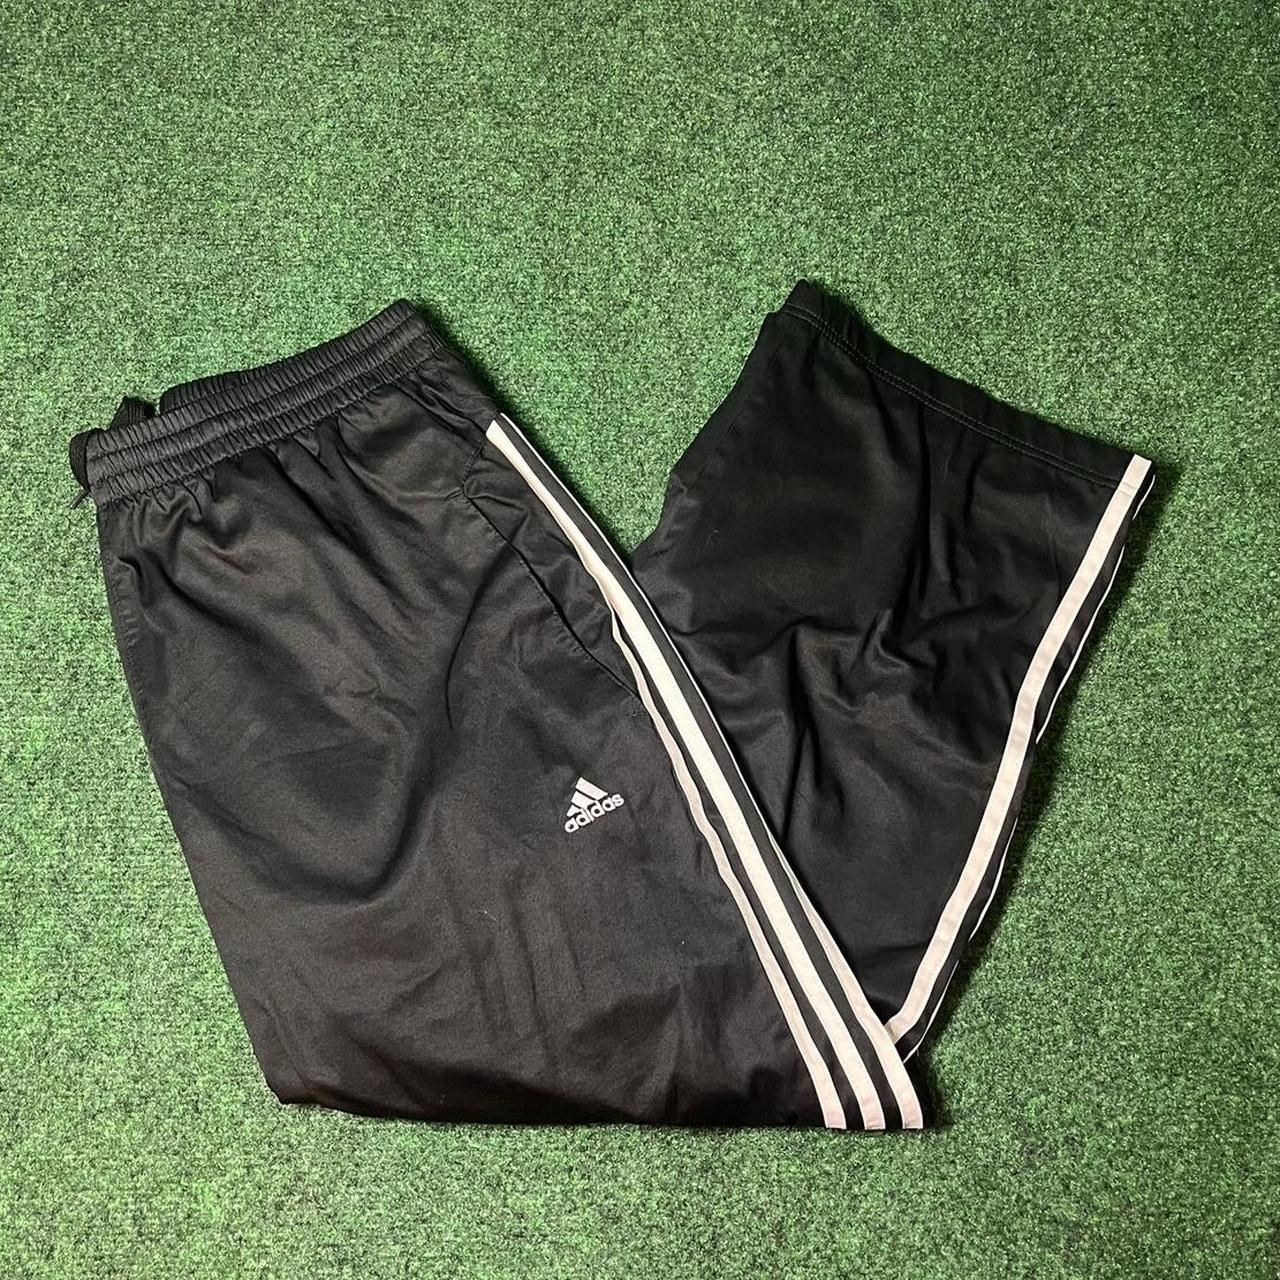 Adidas Soccer Warm-up Pants. Great quality and... - Depop